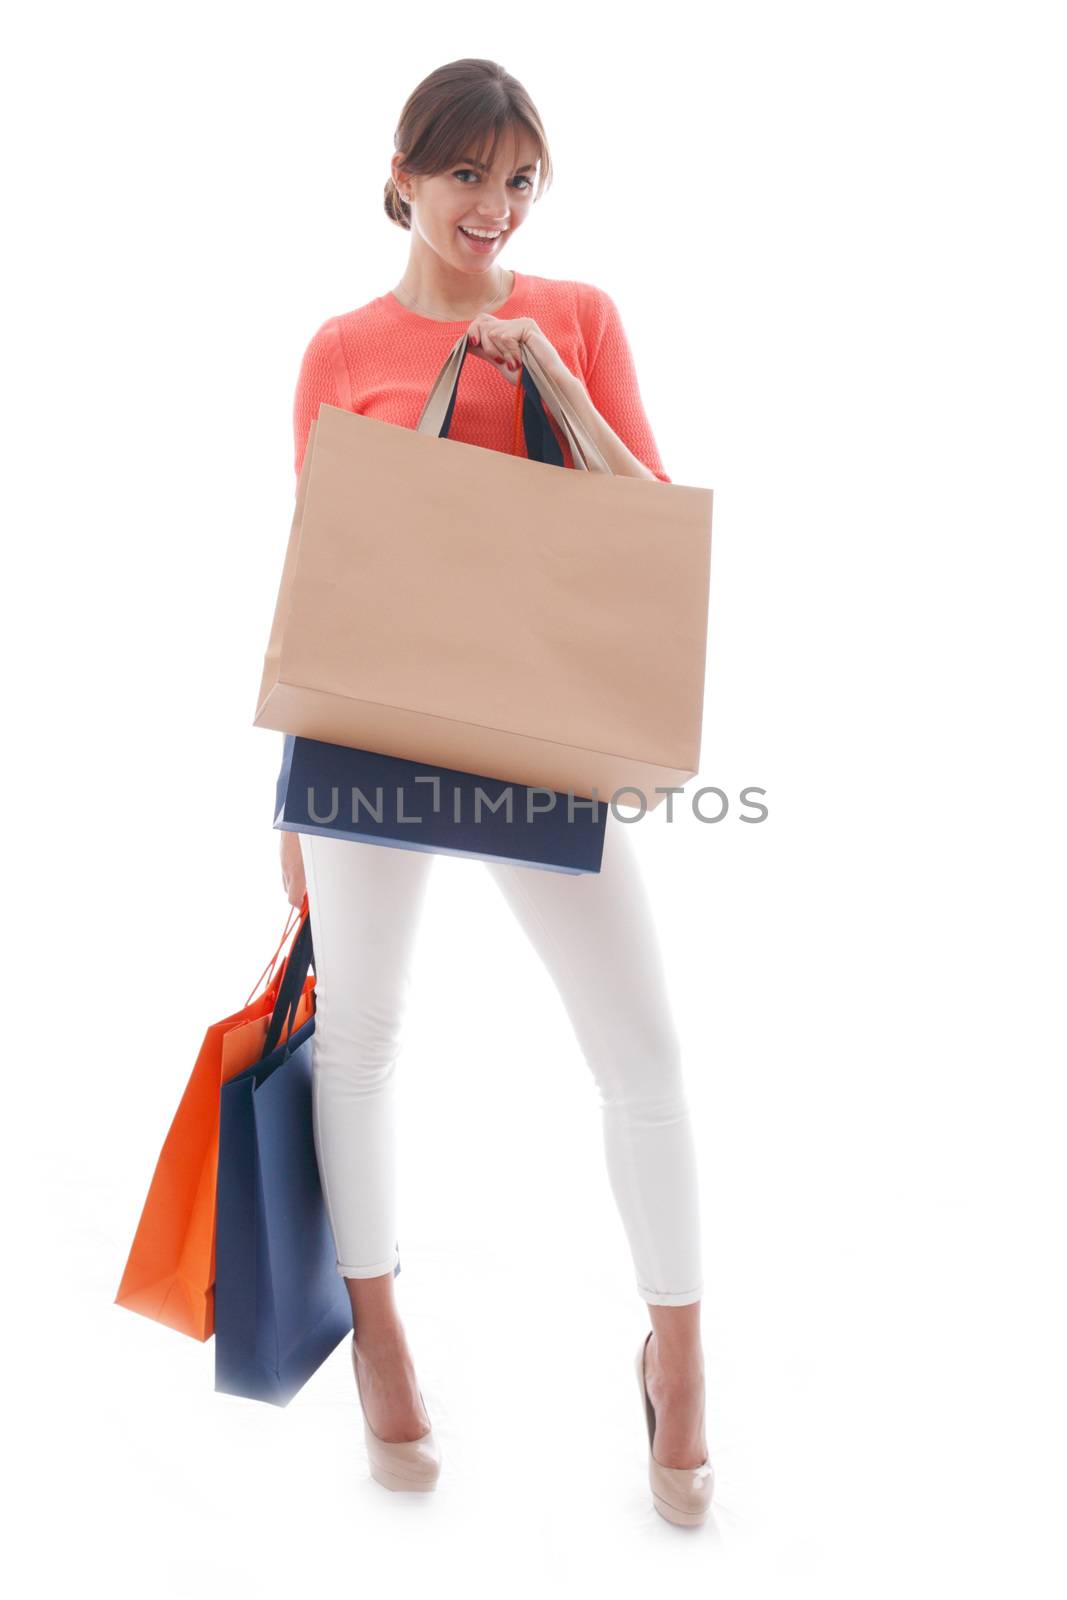 Woman with shopping bags isolated on white background